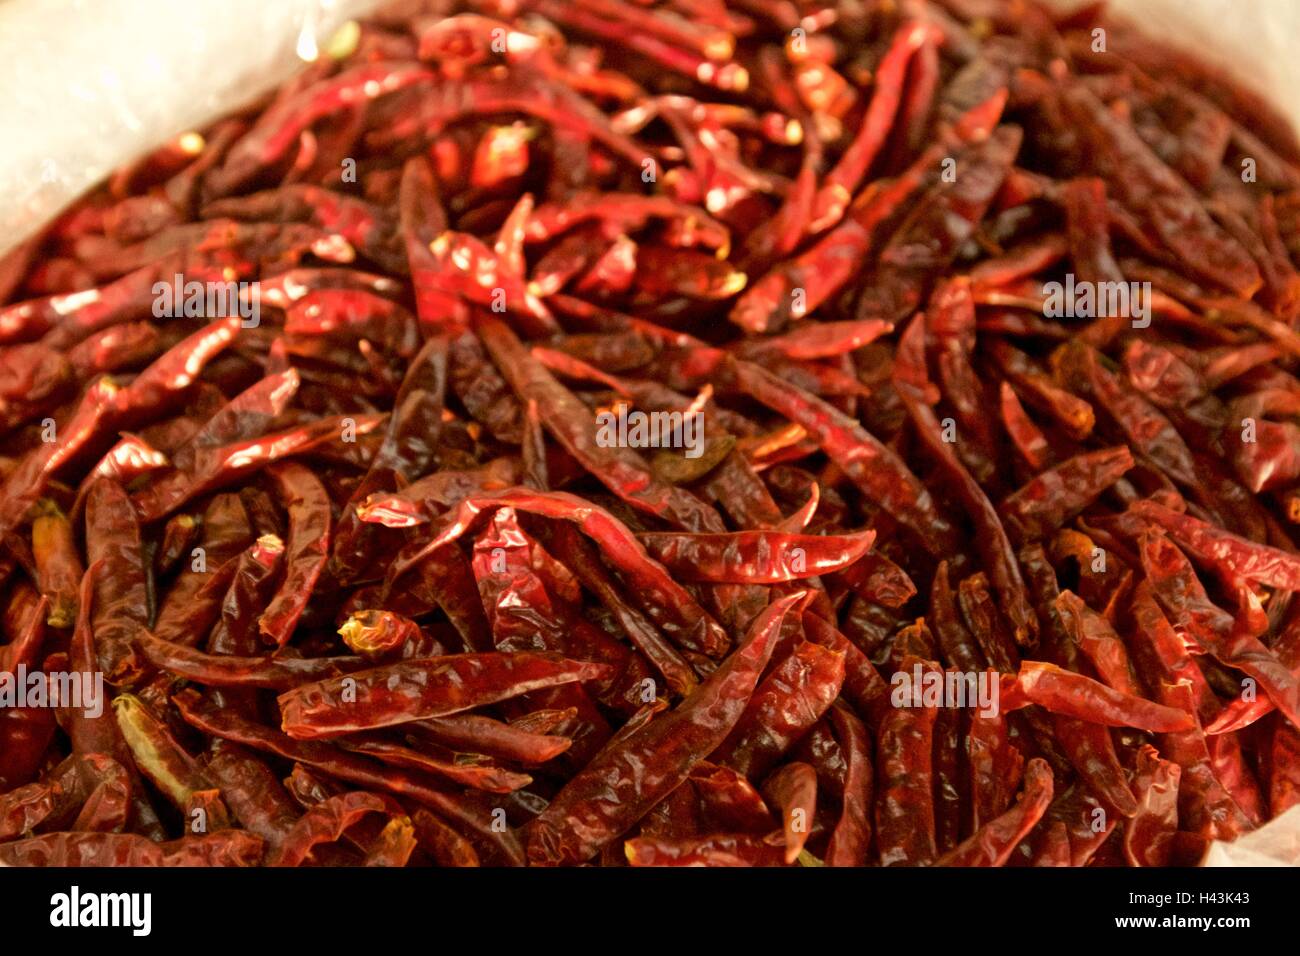 Dry Chilly Thai food Ingredients at the Market. Stock Photo